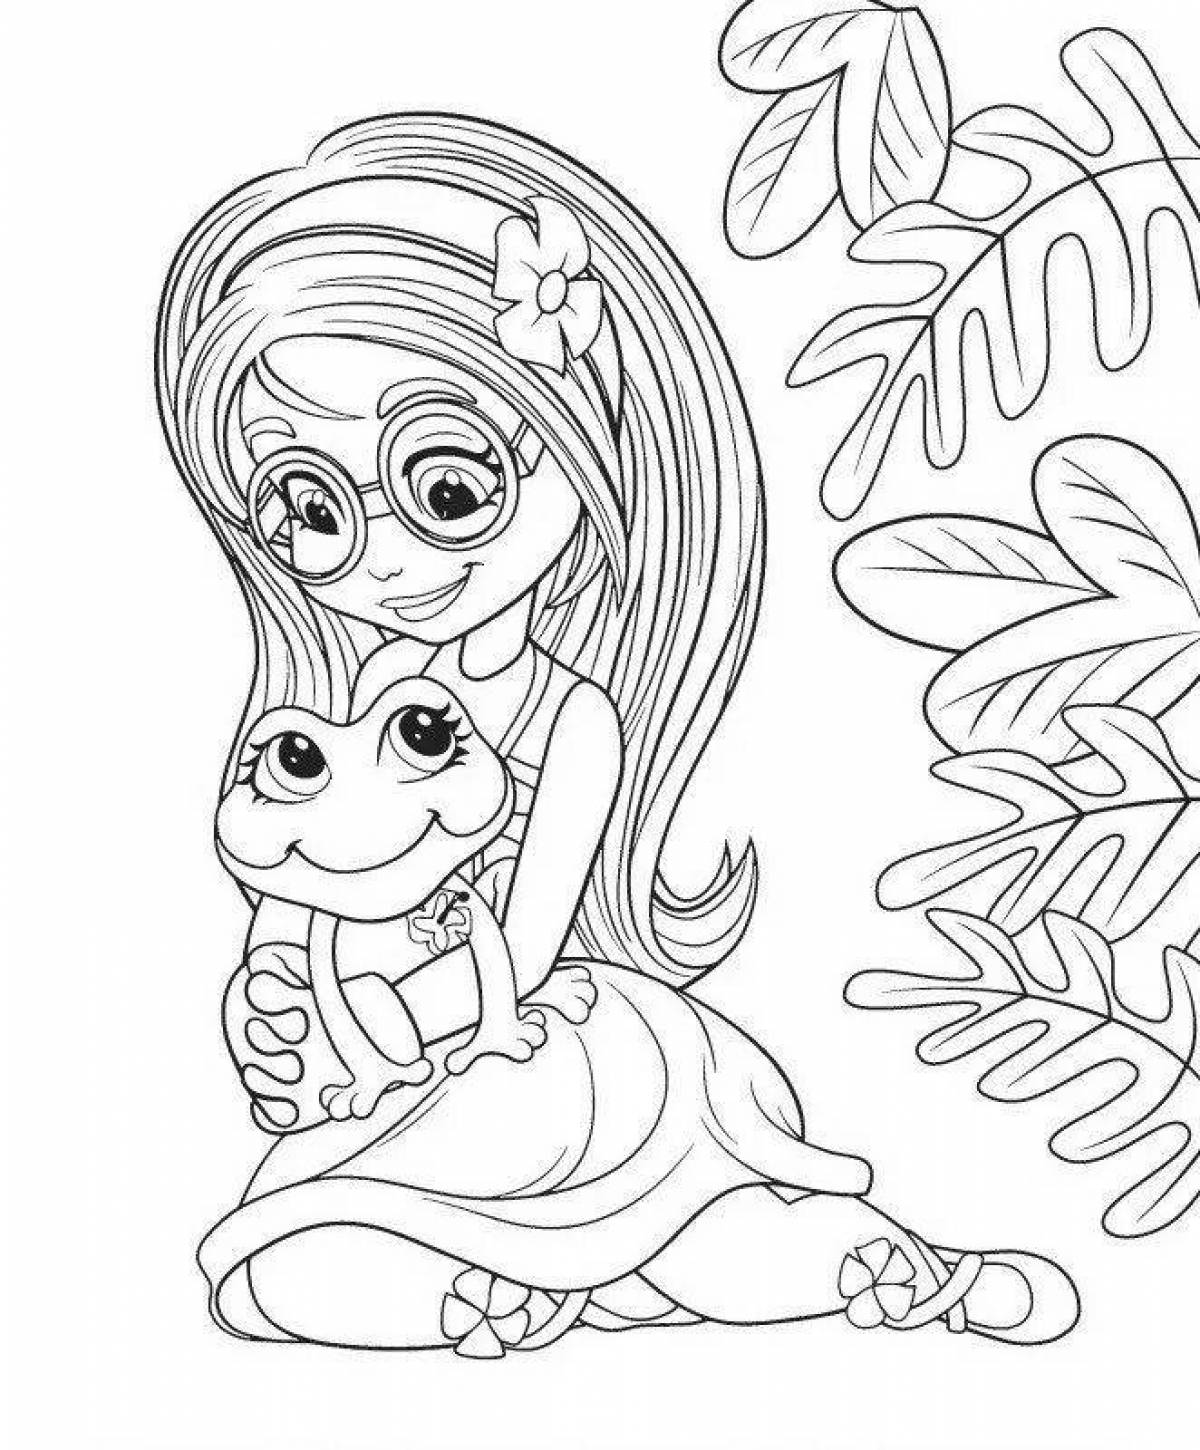 Colorful enchimals coloring page